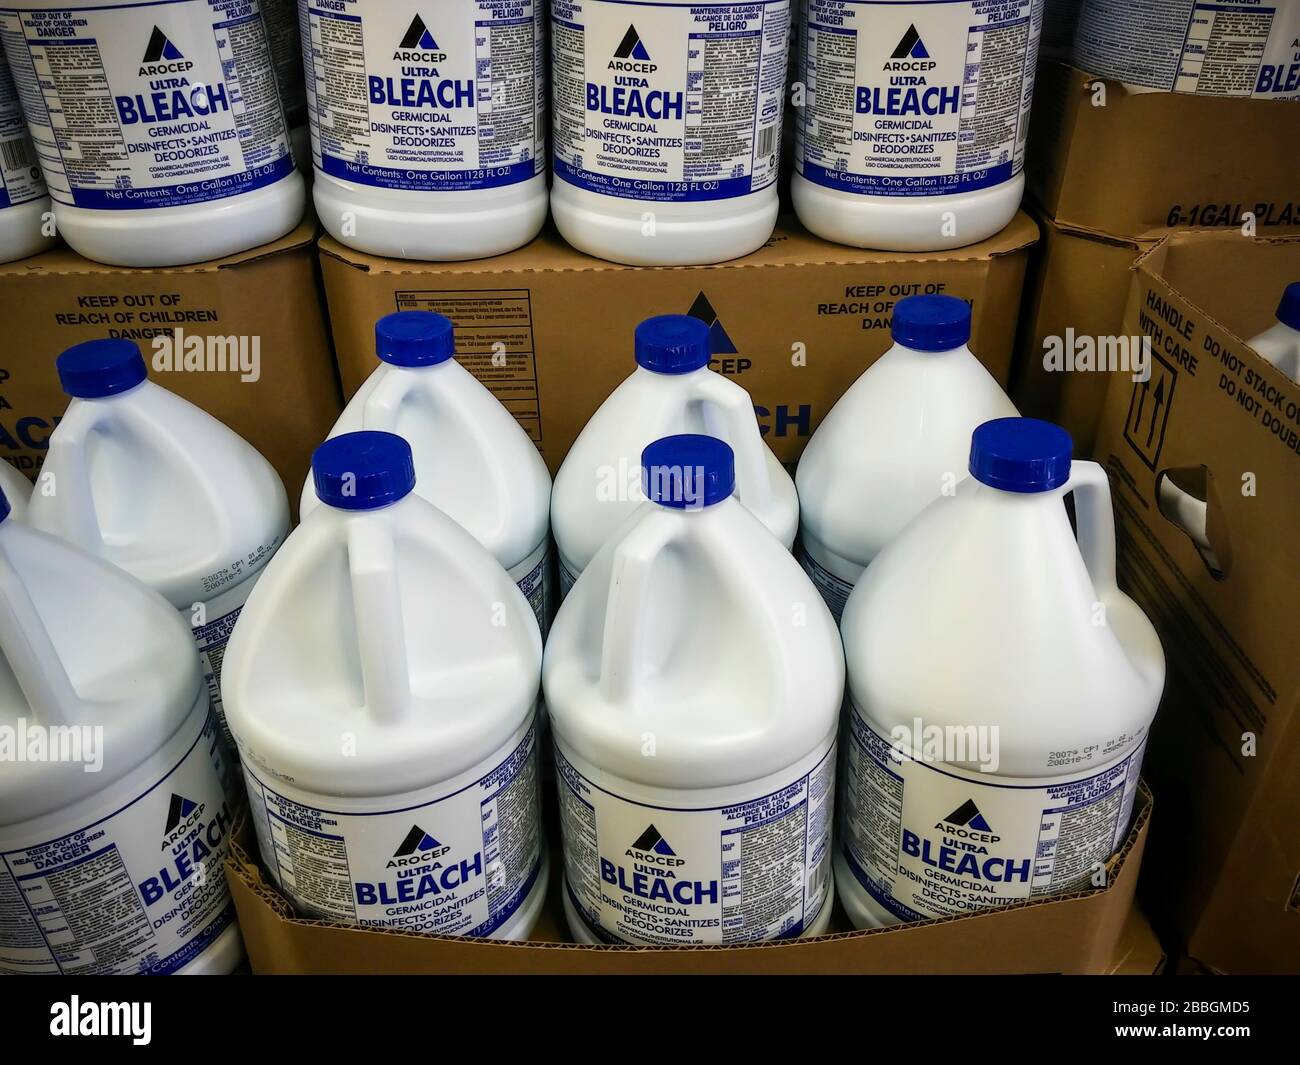 Gallon jugs of bleach in a store in New York on Monday, March 30, 2020. (© Richard B. Levine) Stock Photo